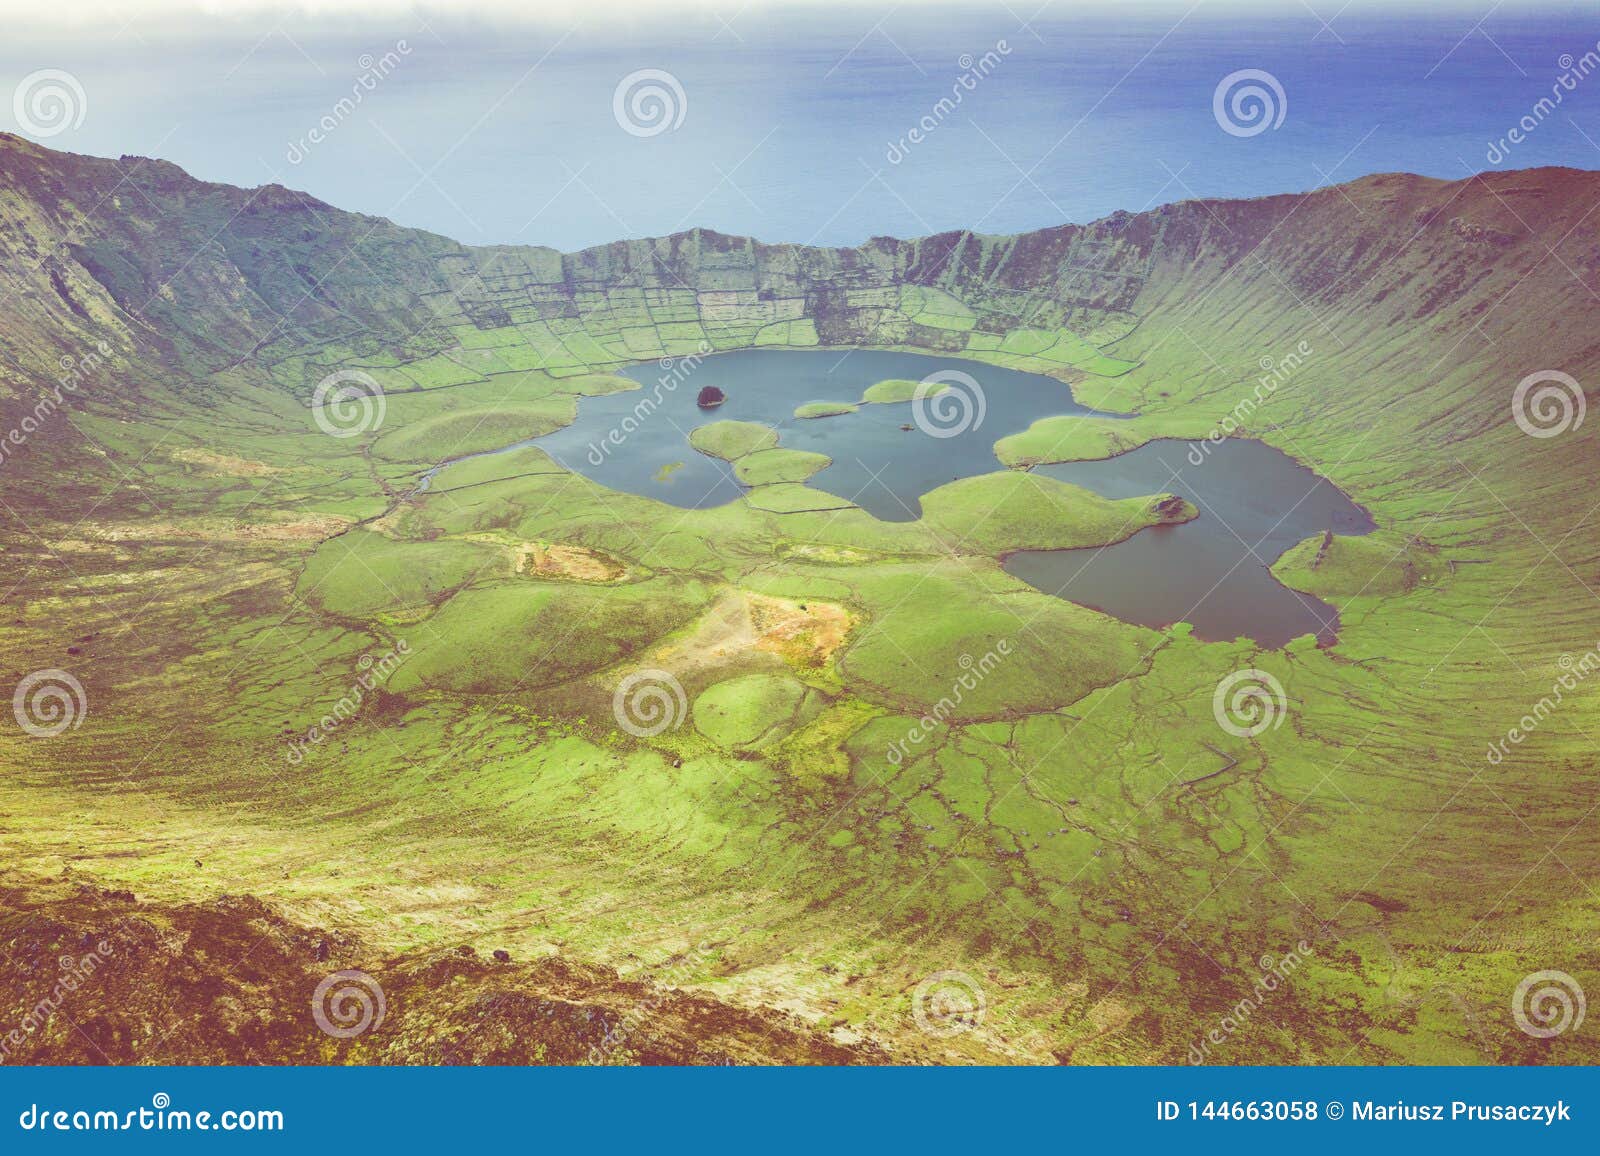 aerial view of volcanic crater caldeirao with a beautiful lake on the top of corvo island. azores islands, portugal